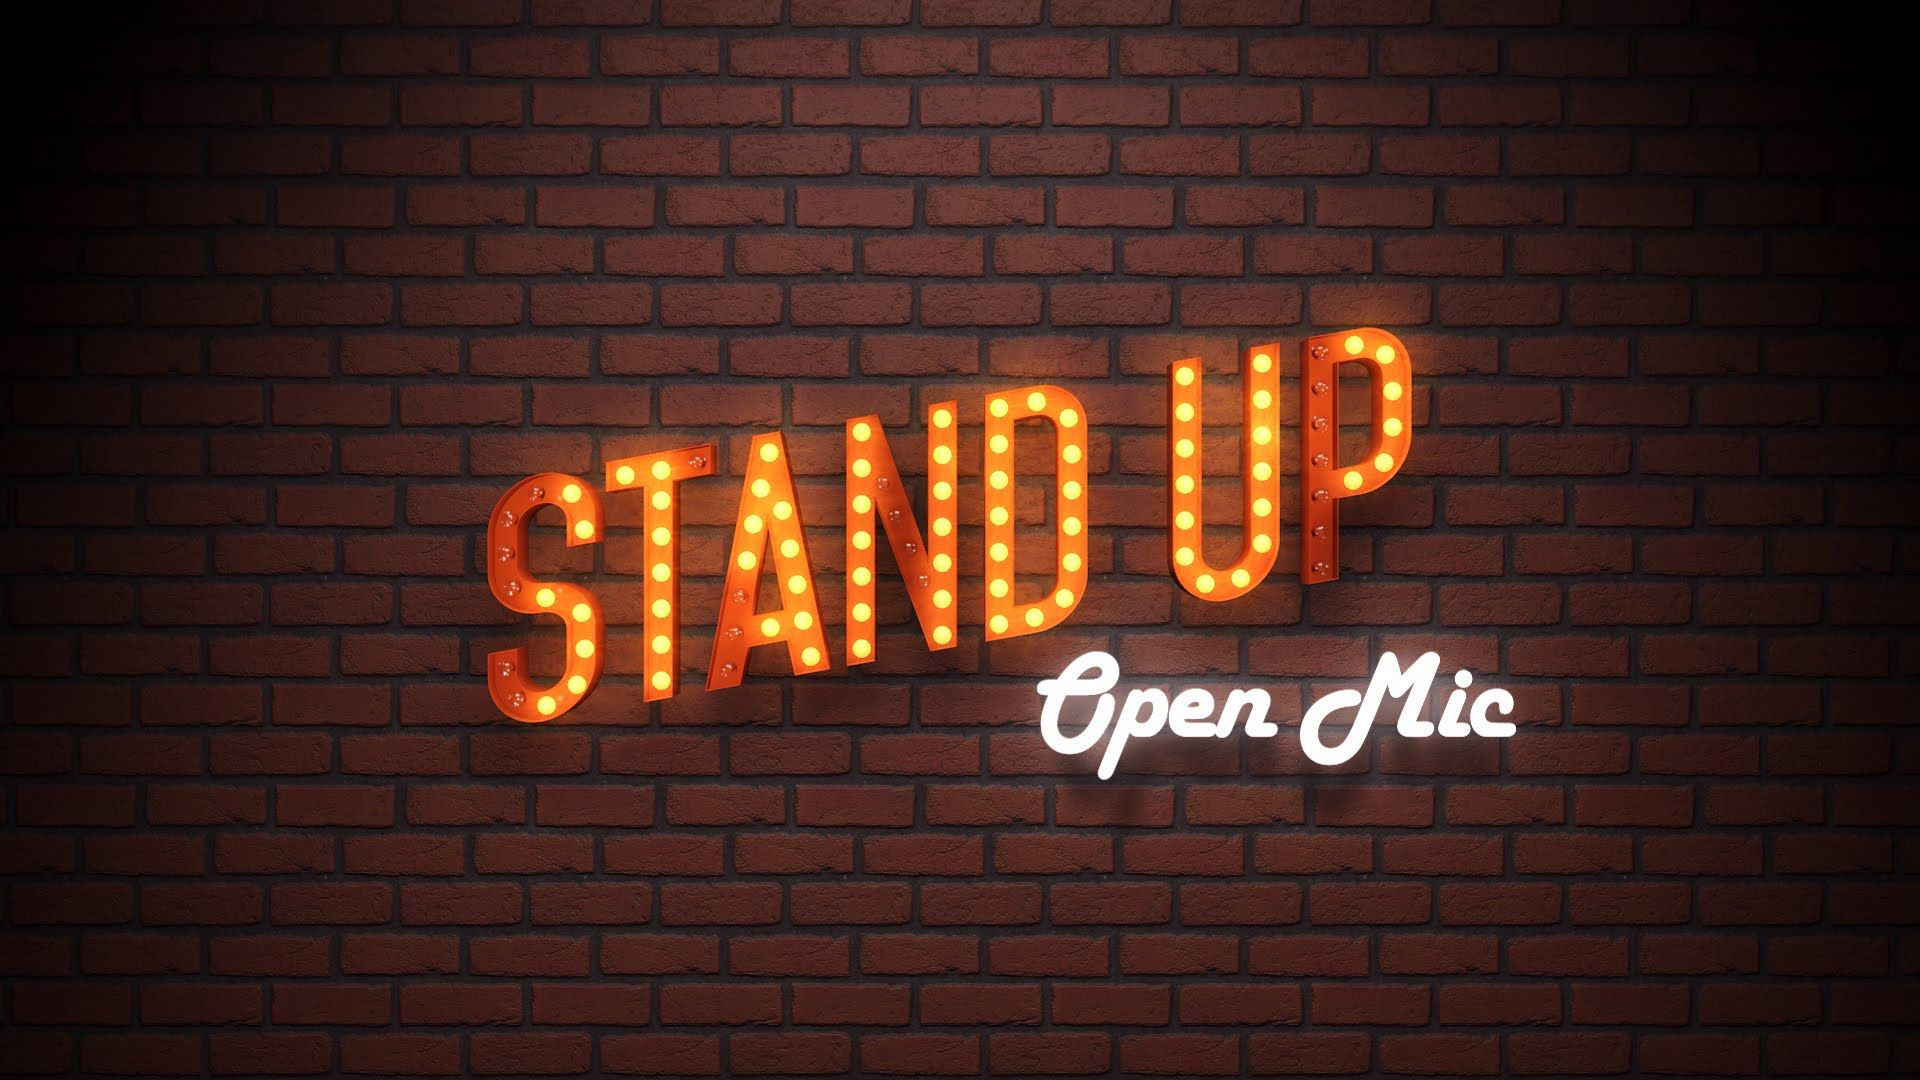 Stand Up Wallpaper. Stand PowerPoint Background, Stand Up Mickey Mouse Background and Stand Up Comedy Wallpaper